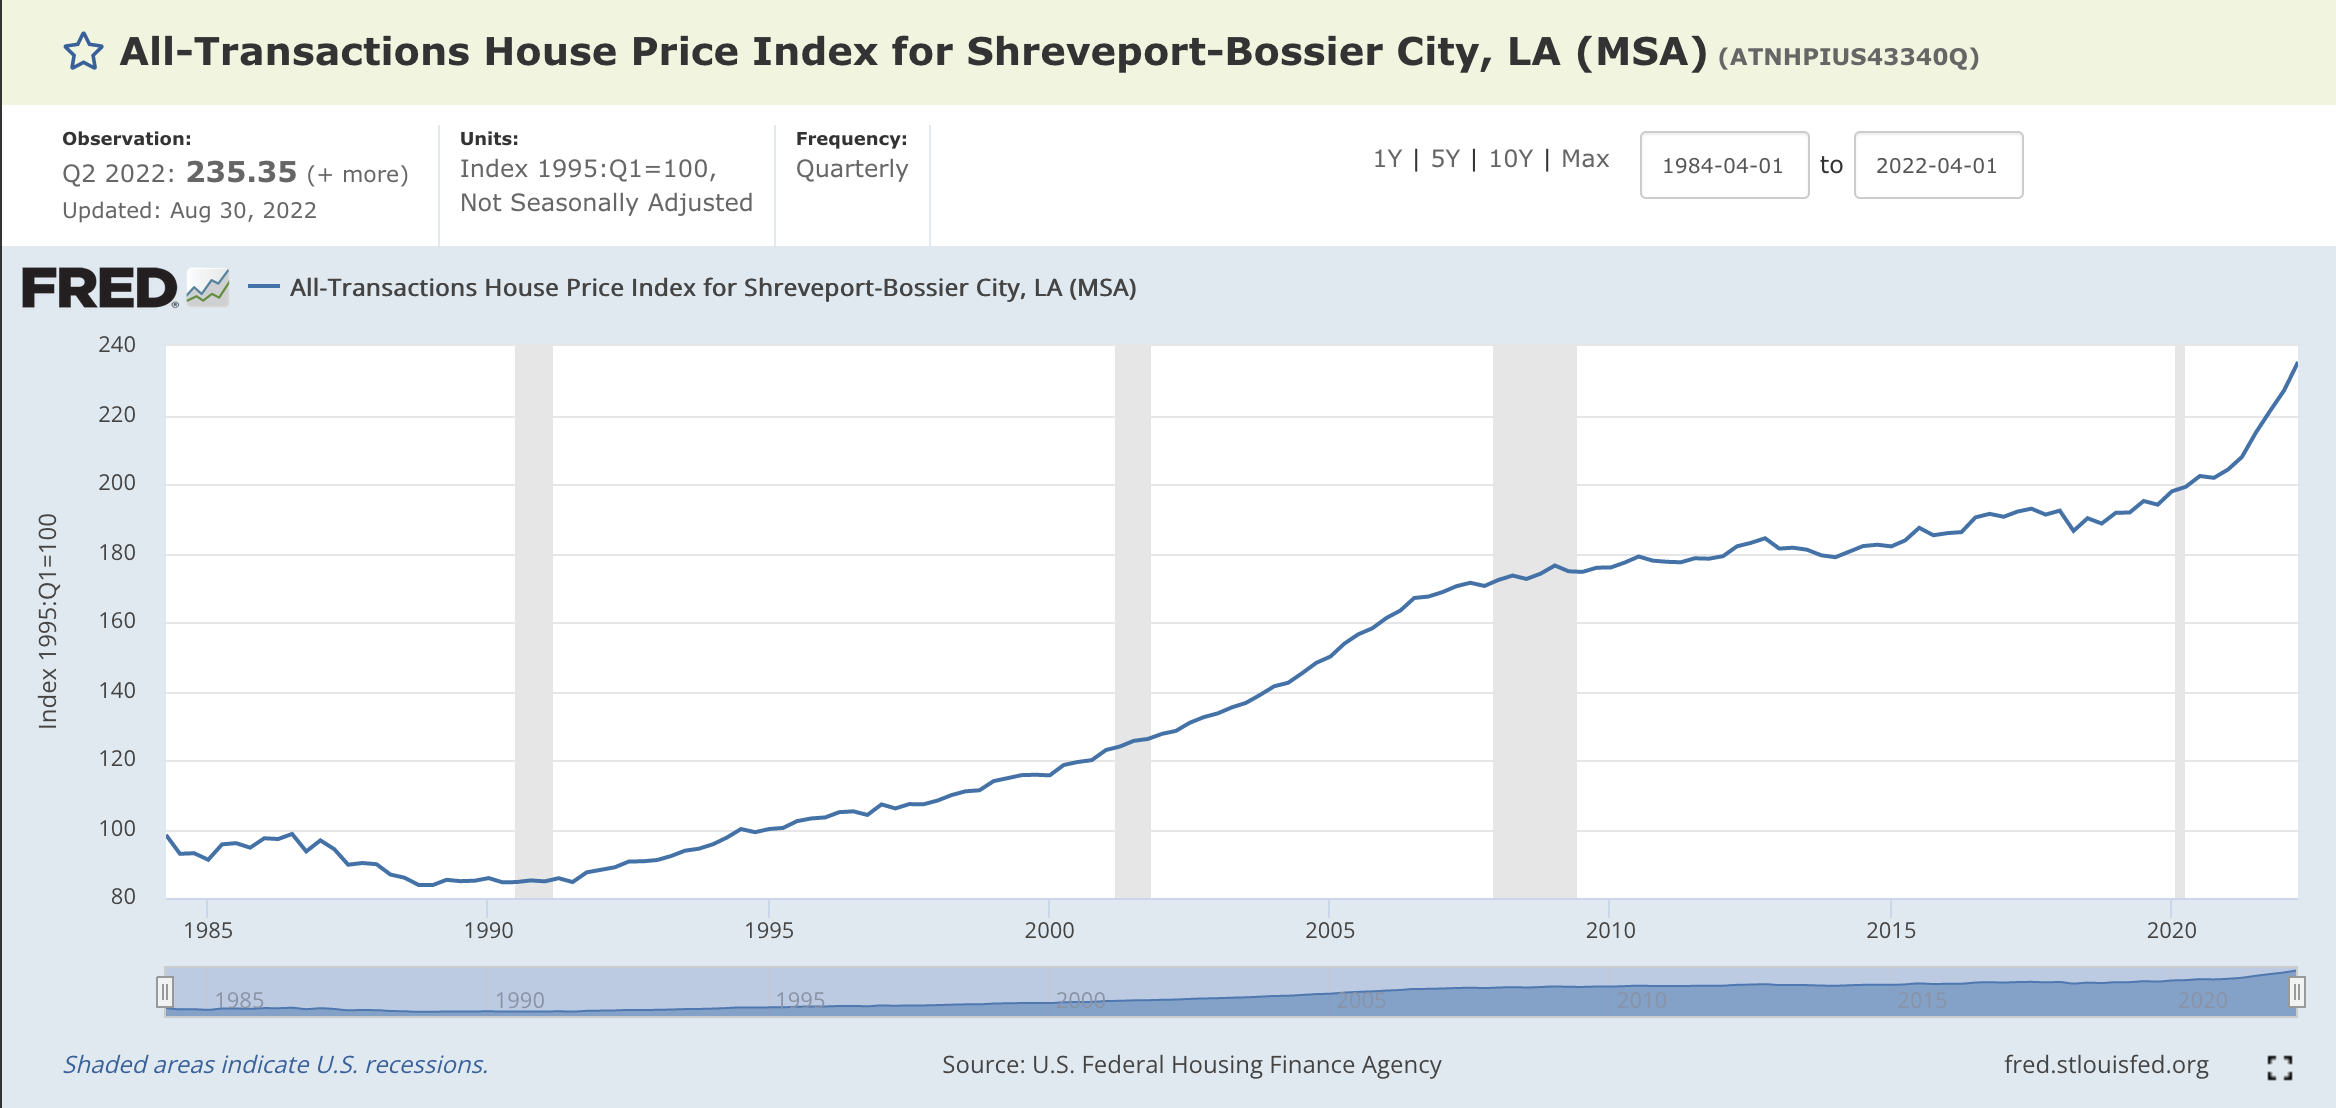 A graph showing the house price index for Shreveport-Bossier City